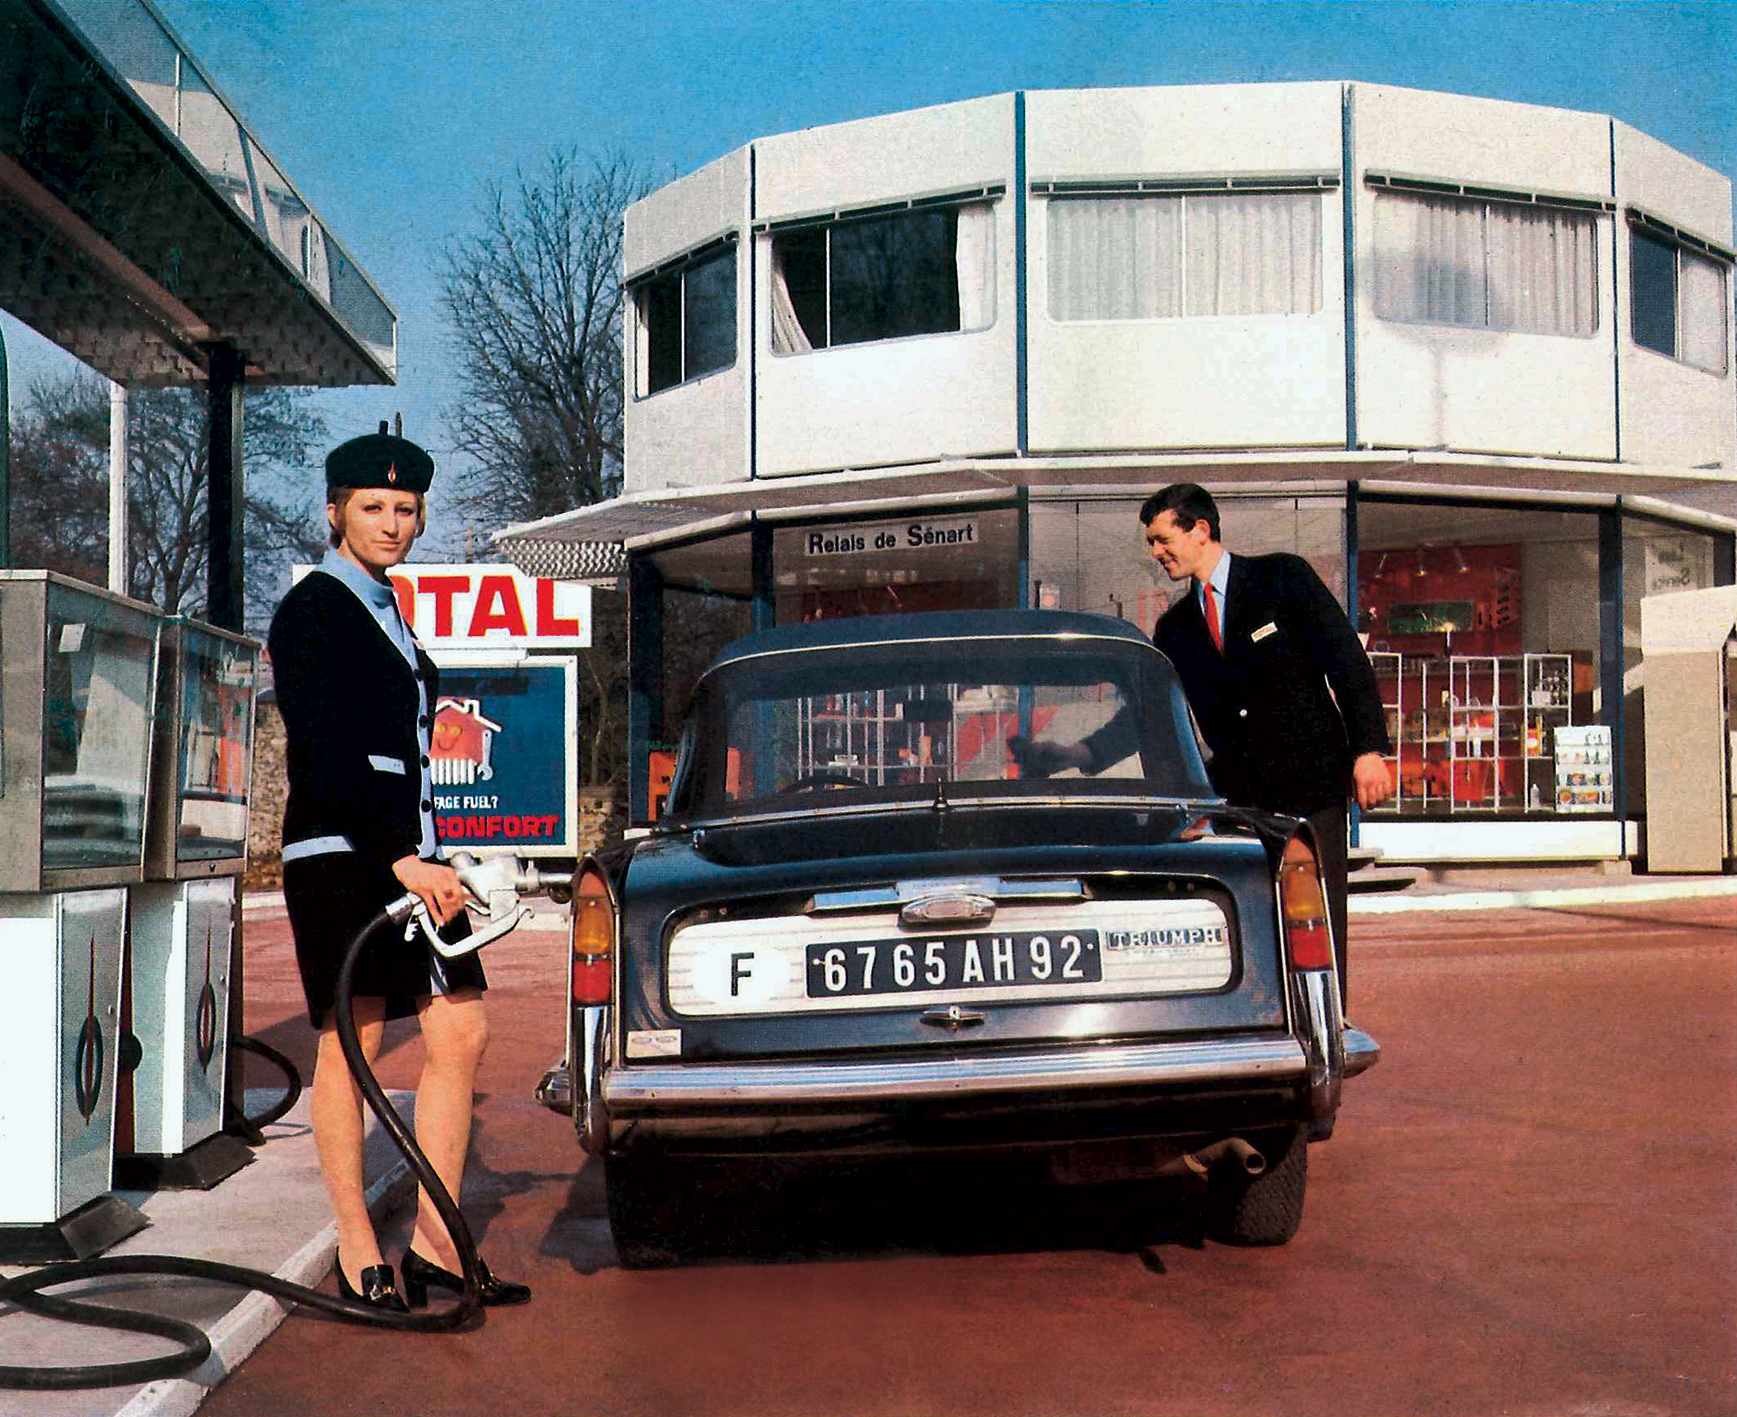 “A new kind of service station”. Photograph in <i>Nouvelles Total</i>, the Total company house journal, no. 46, April 1970.